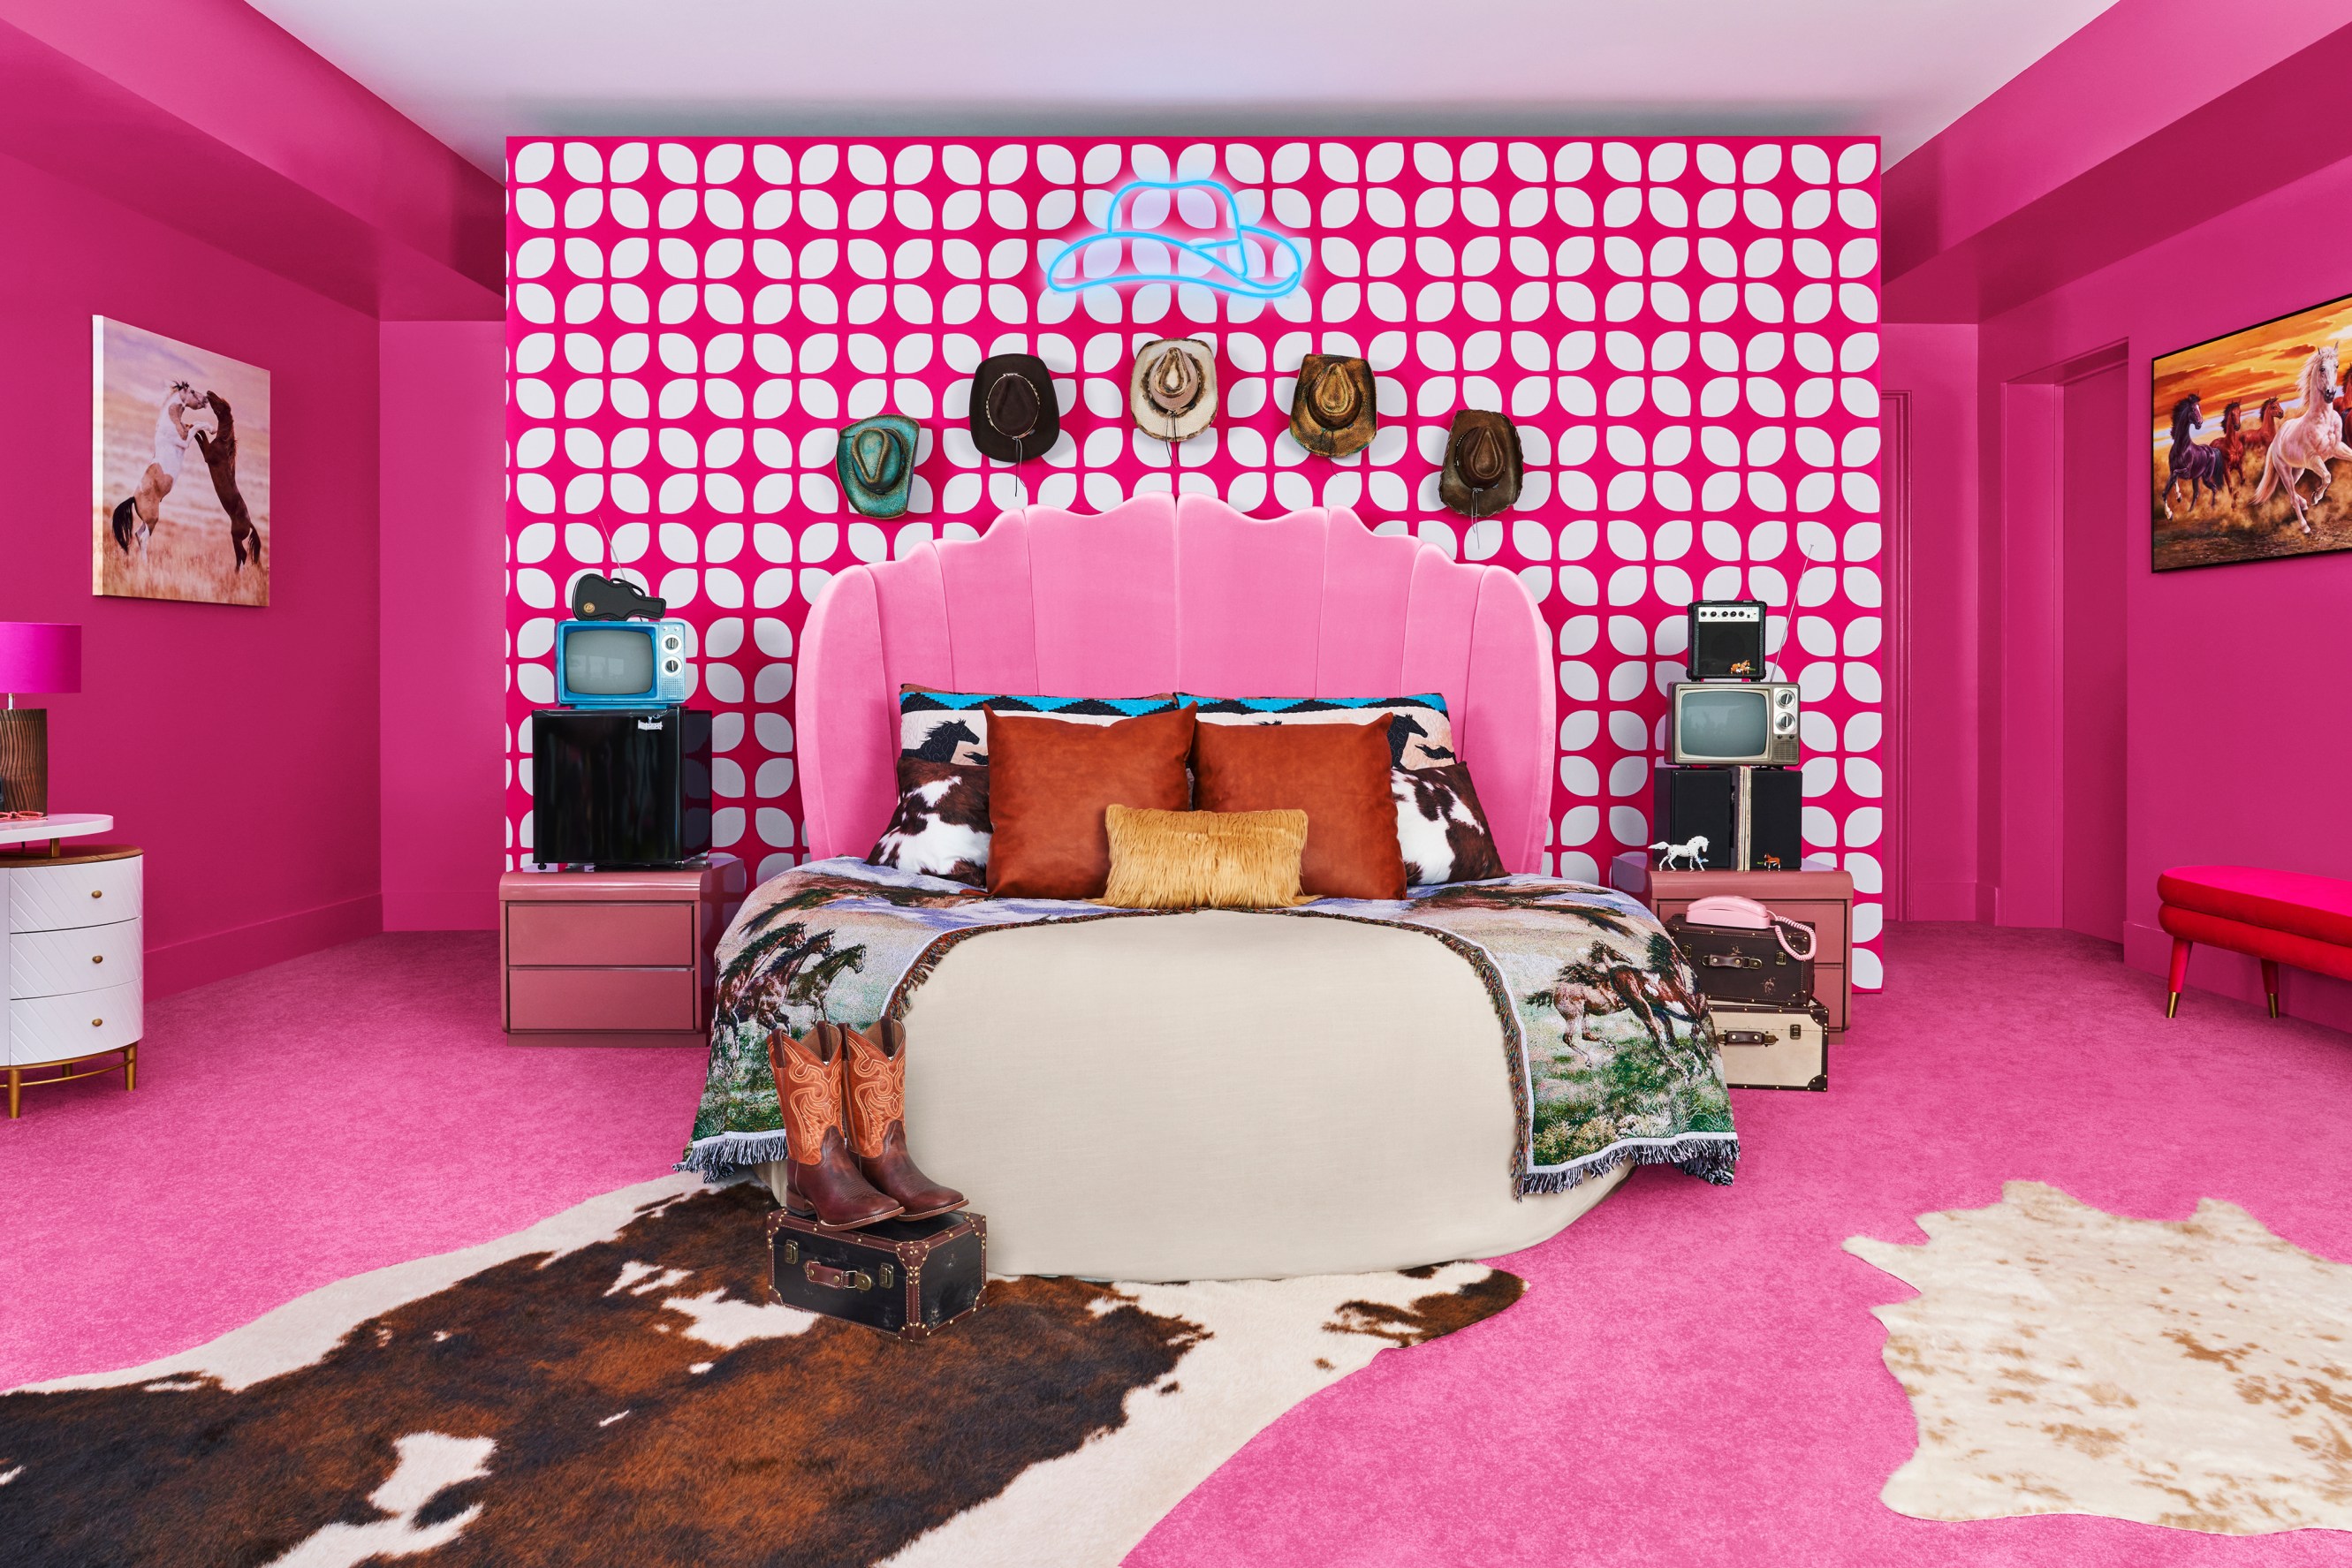 Interior of Ken's bedroom, mostly pink, accented by animal print rugs and cowboy hats.